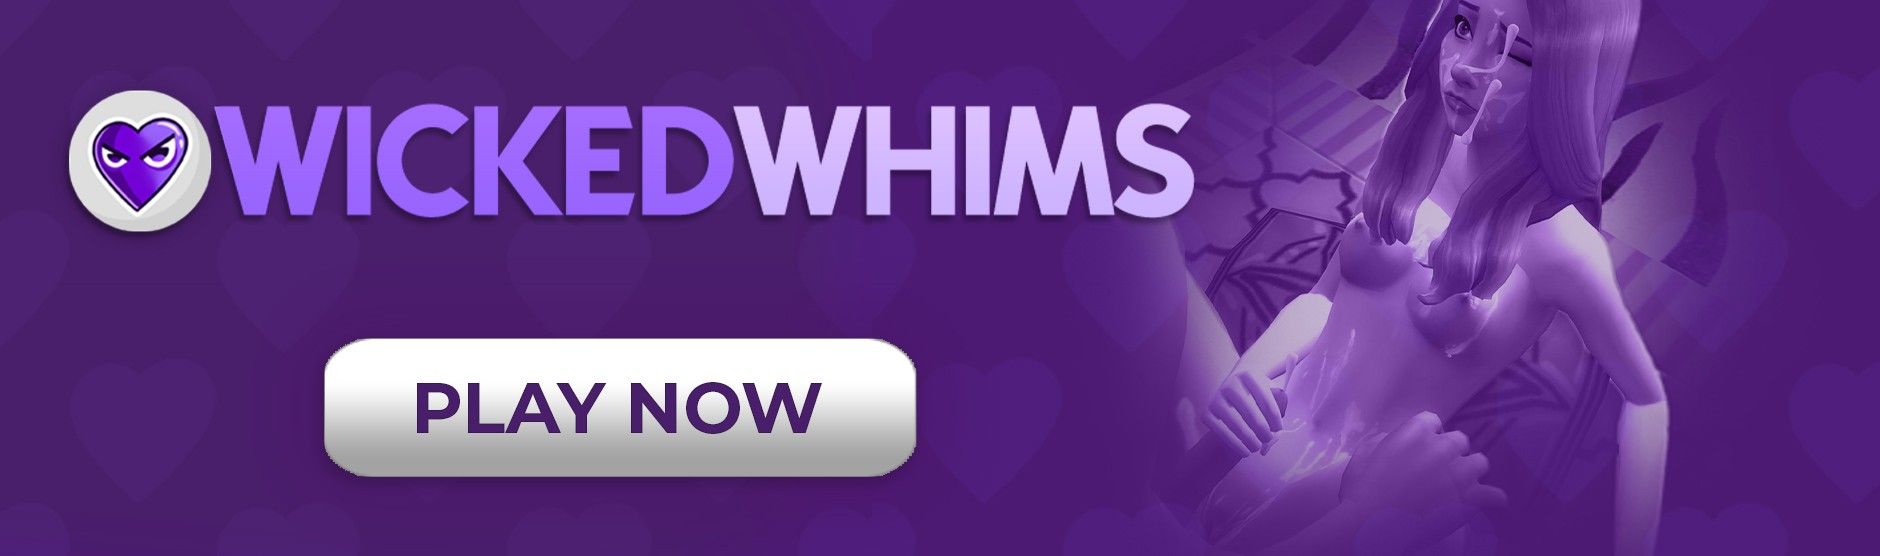 WickedWhims game